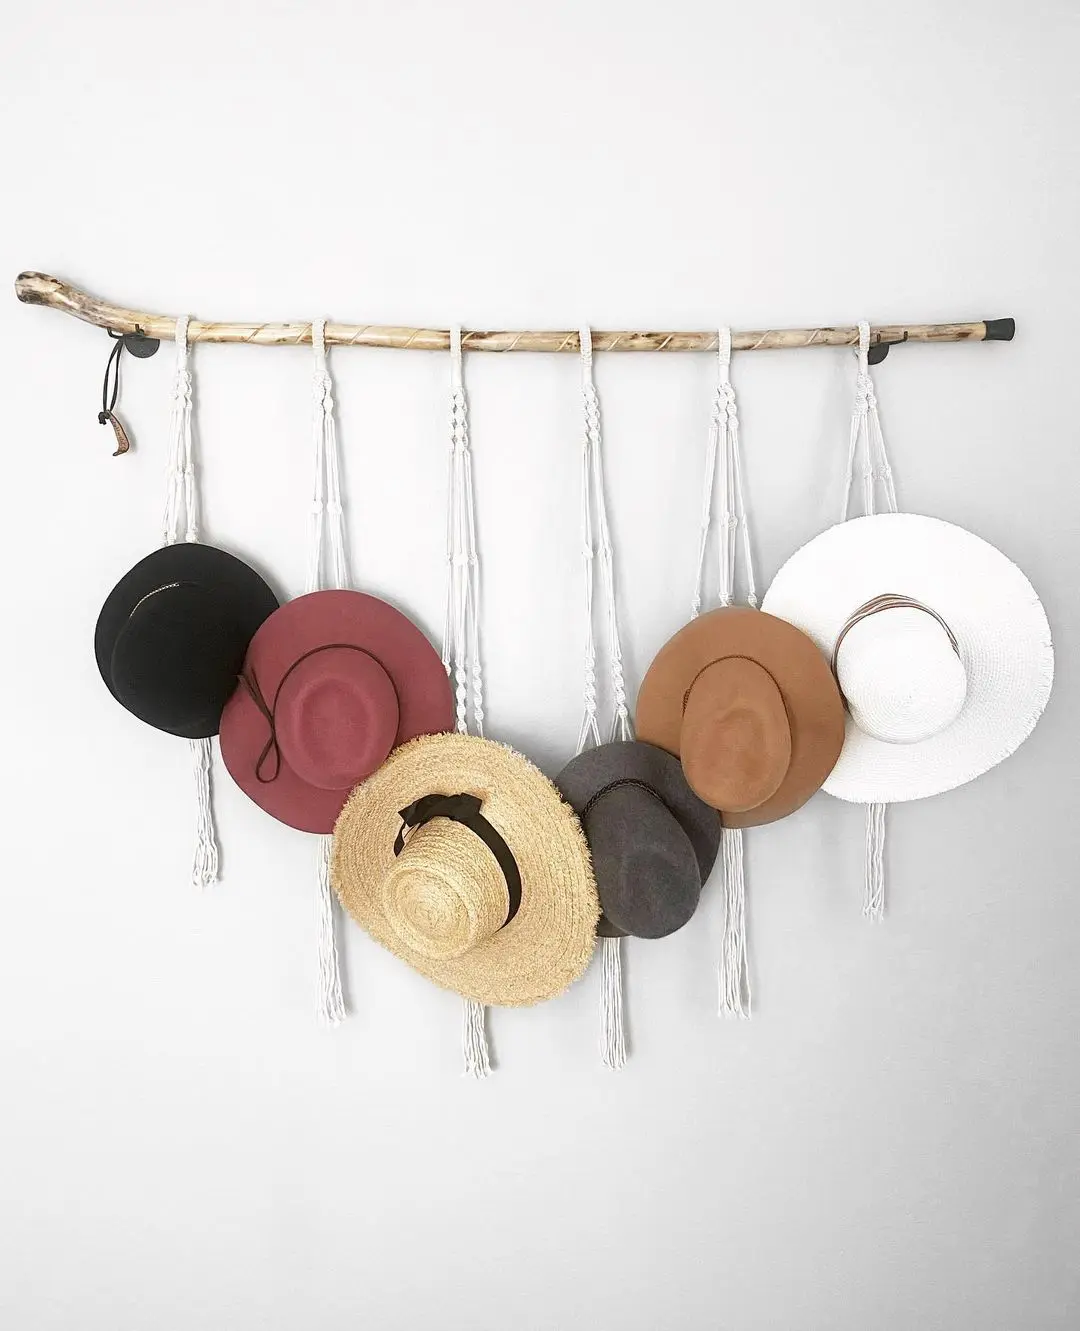 How To Build A Hat Rack 23 Functional Hat Rack Ideas We Love - Craftsy Hacks